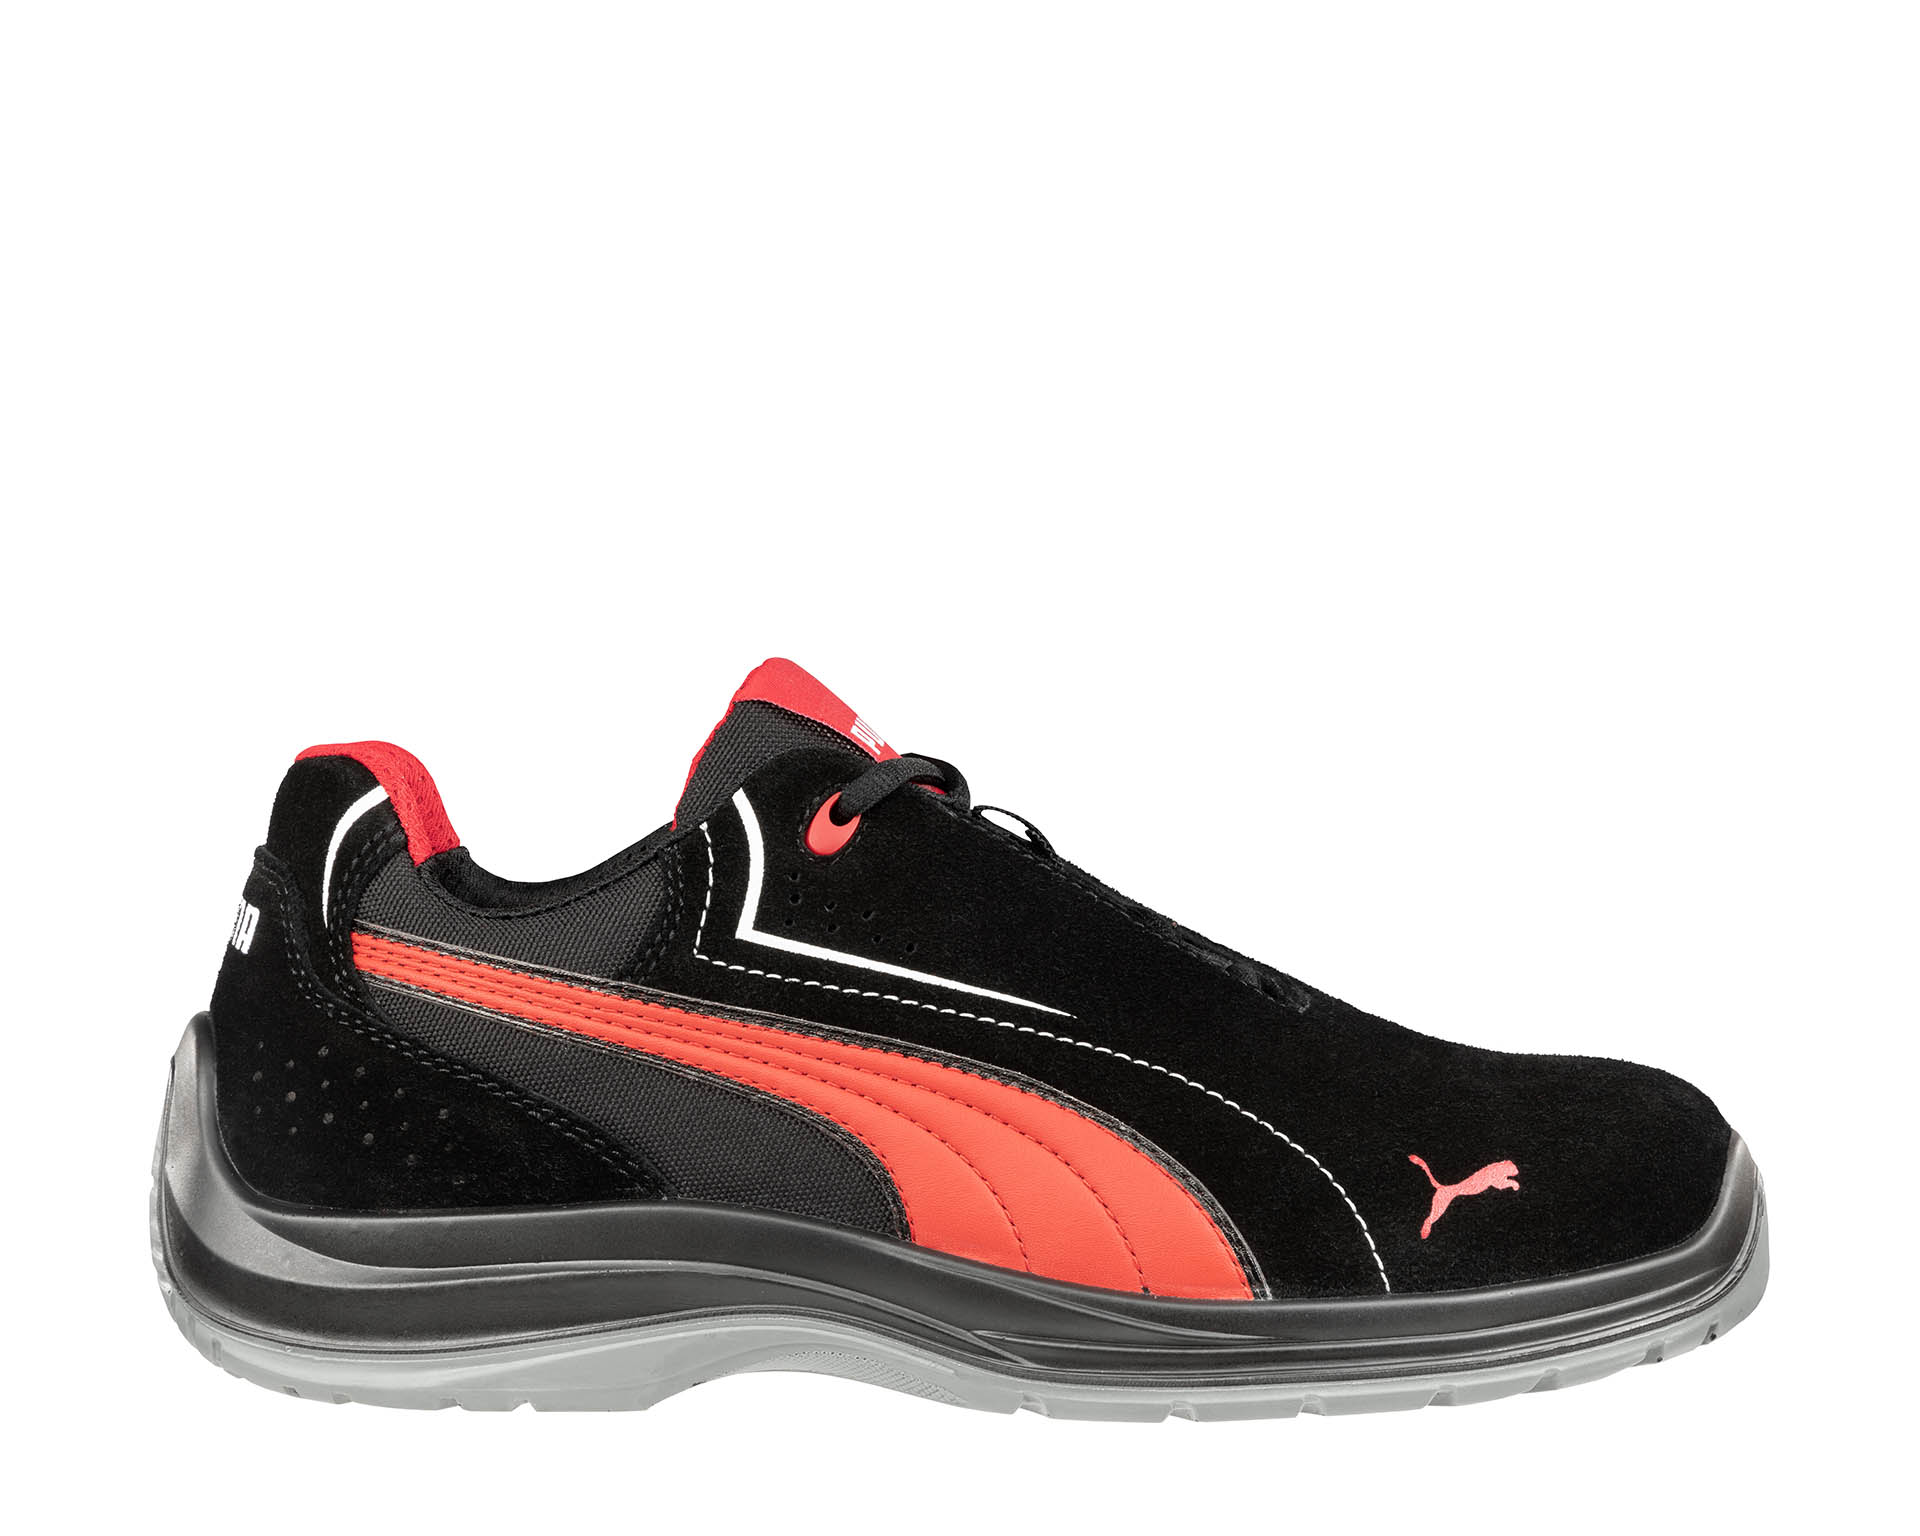 TOURING BLACK LOW|PUMA SAFETY work shoes ASTM EH SR | Puma Safety USA